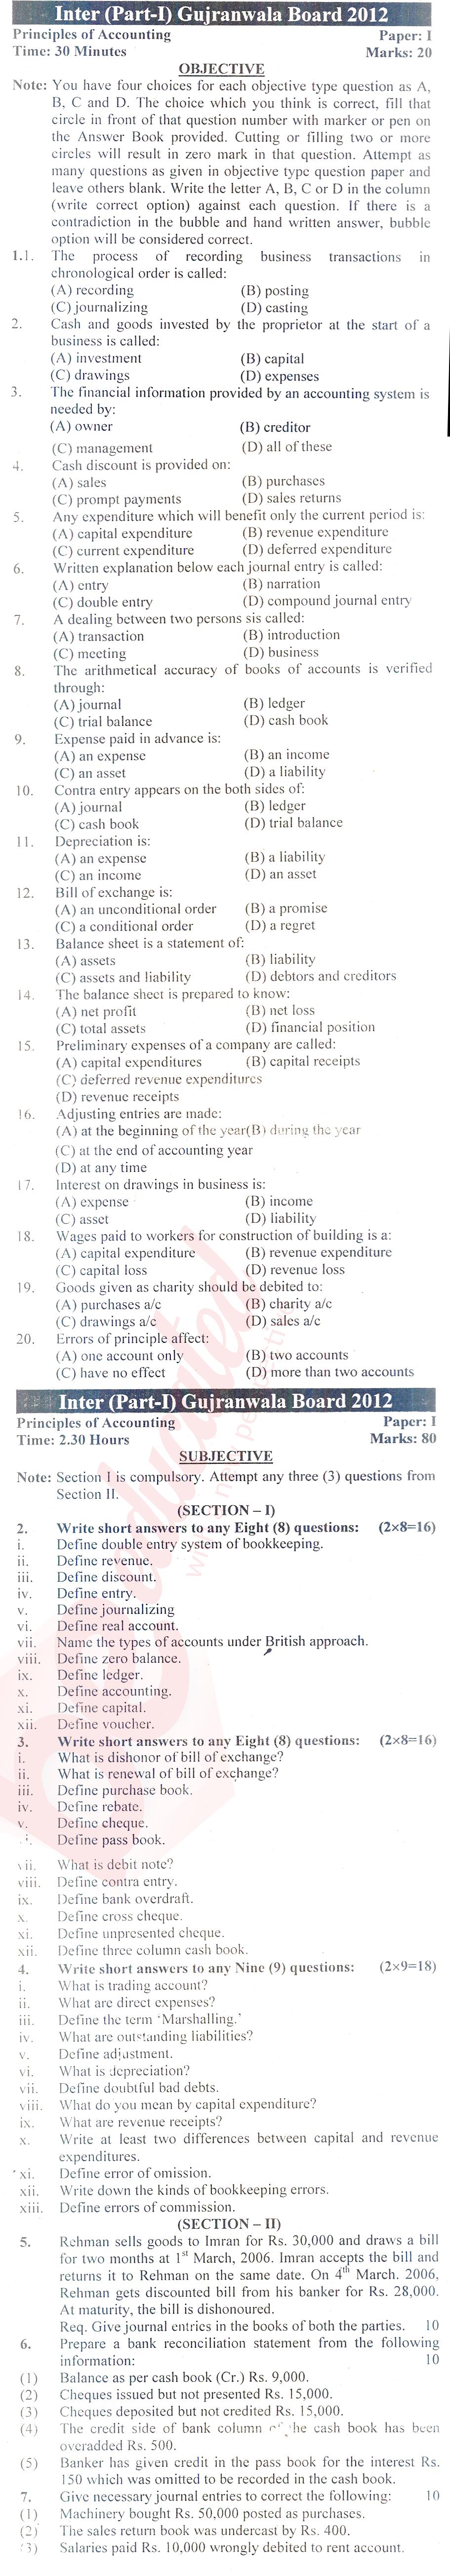 Principles of Accounting ICOM Part 1 Past Paper Group 1 BISE Gujranwala 2012